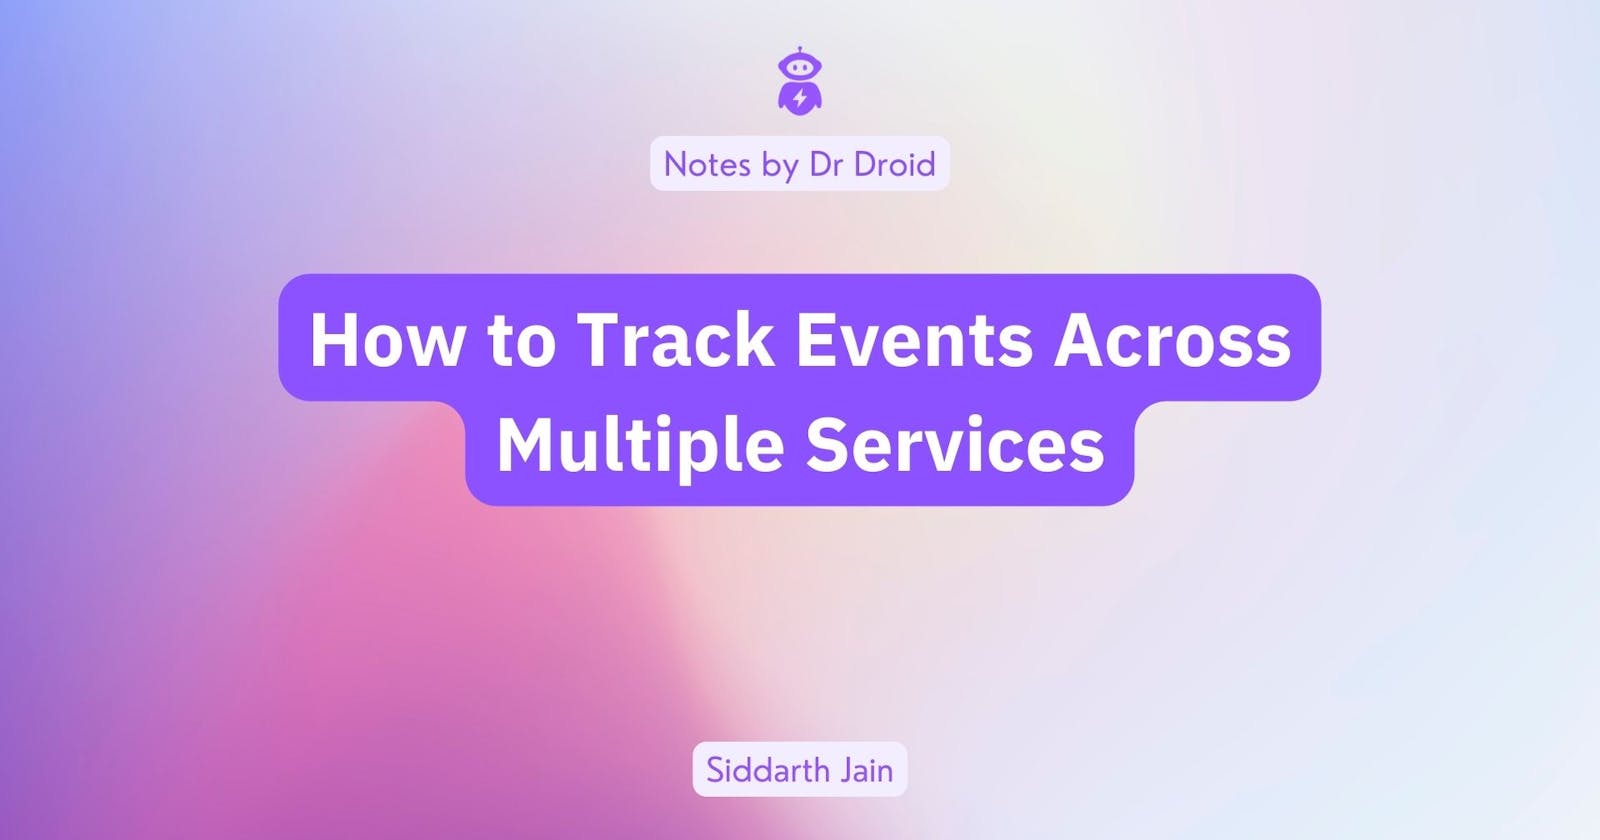 How to Track Events Across Multiple Services